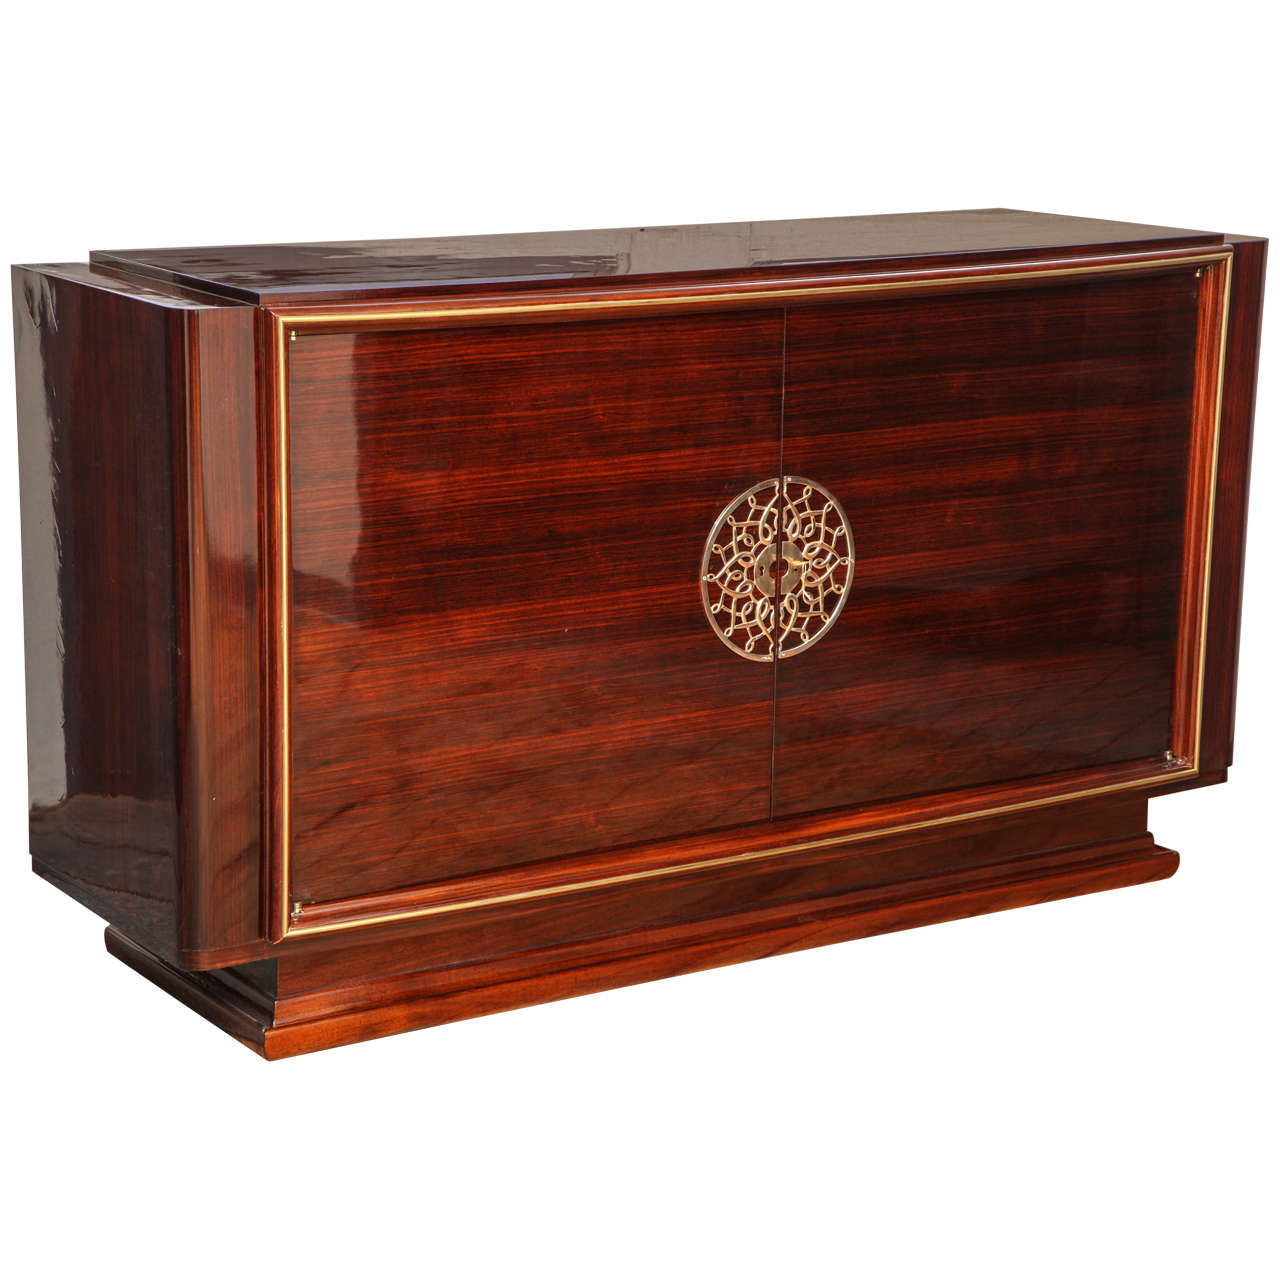 Chic Art Deco Sideboard with Original Bronze Medallion For Sale